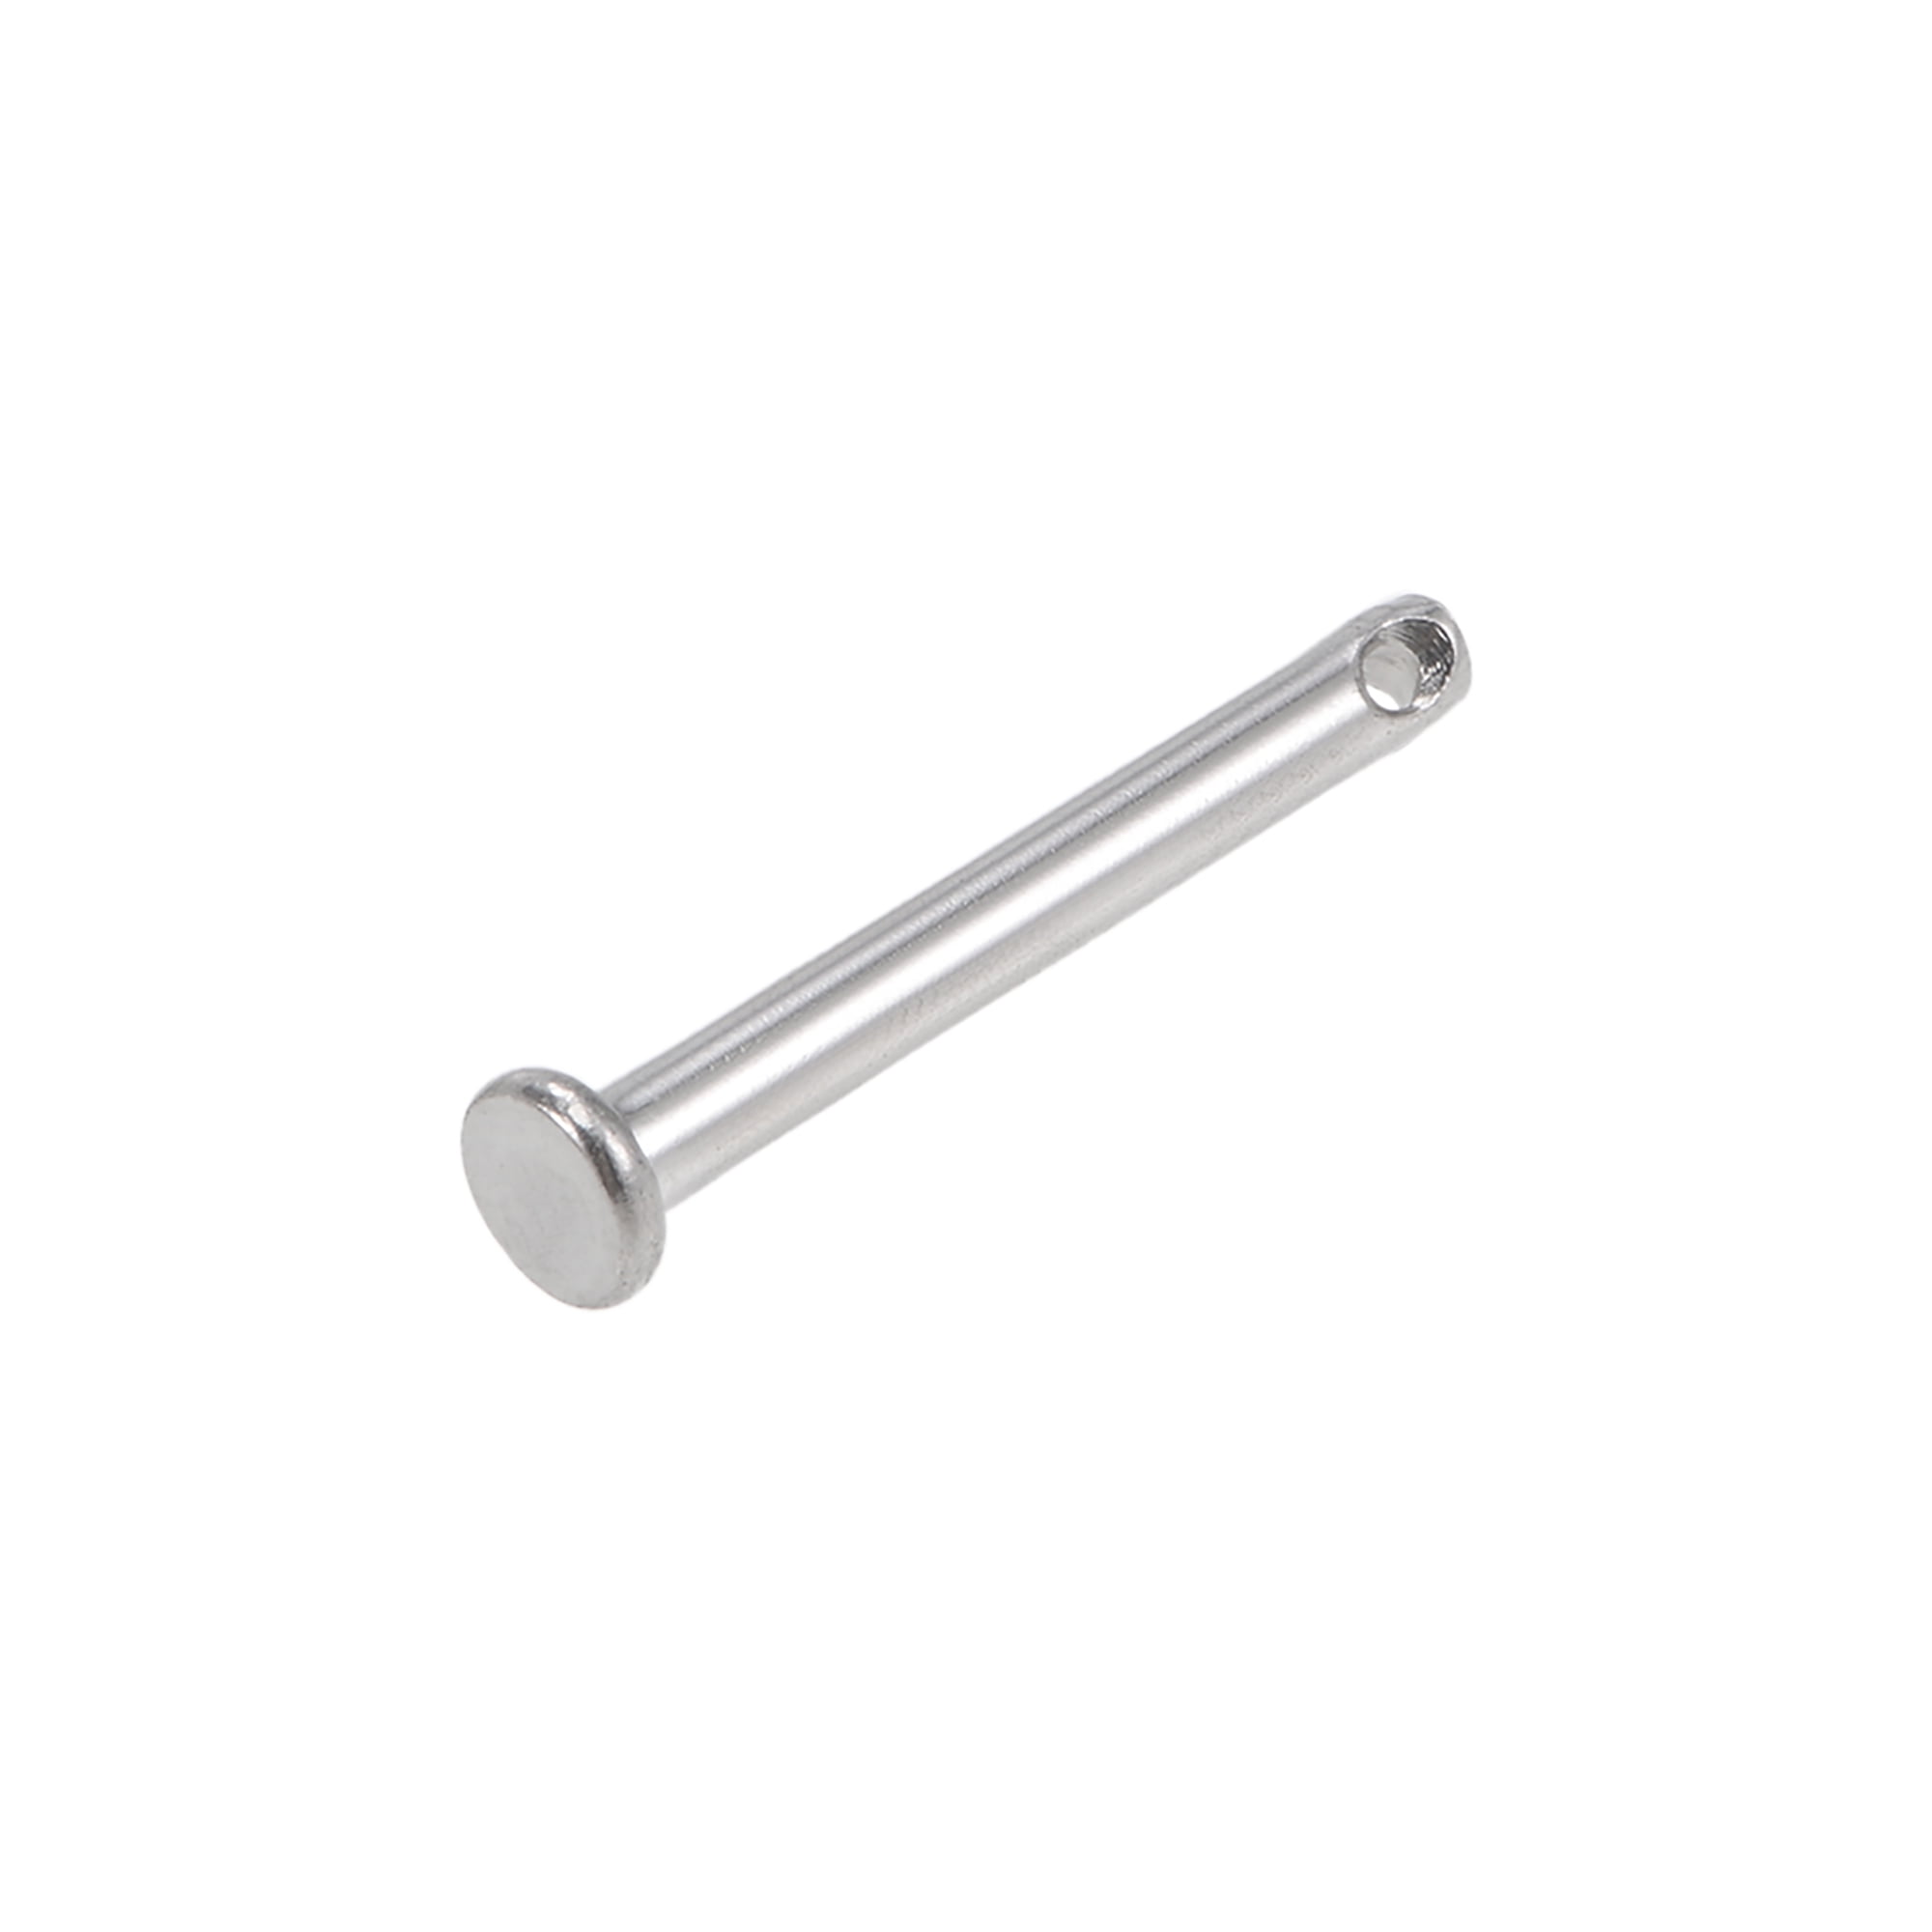 uxcell Single Hole Clevis Pins 6mm X 40mm Flat Head 304 Stainless Steel Link Hinge Pin 10Pcs 